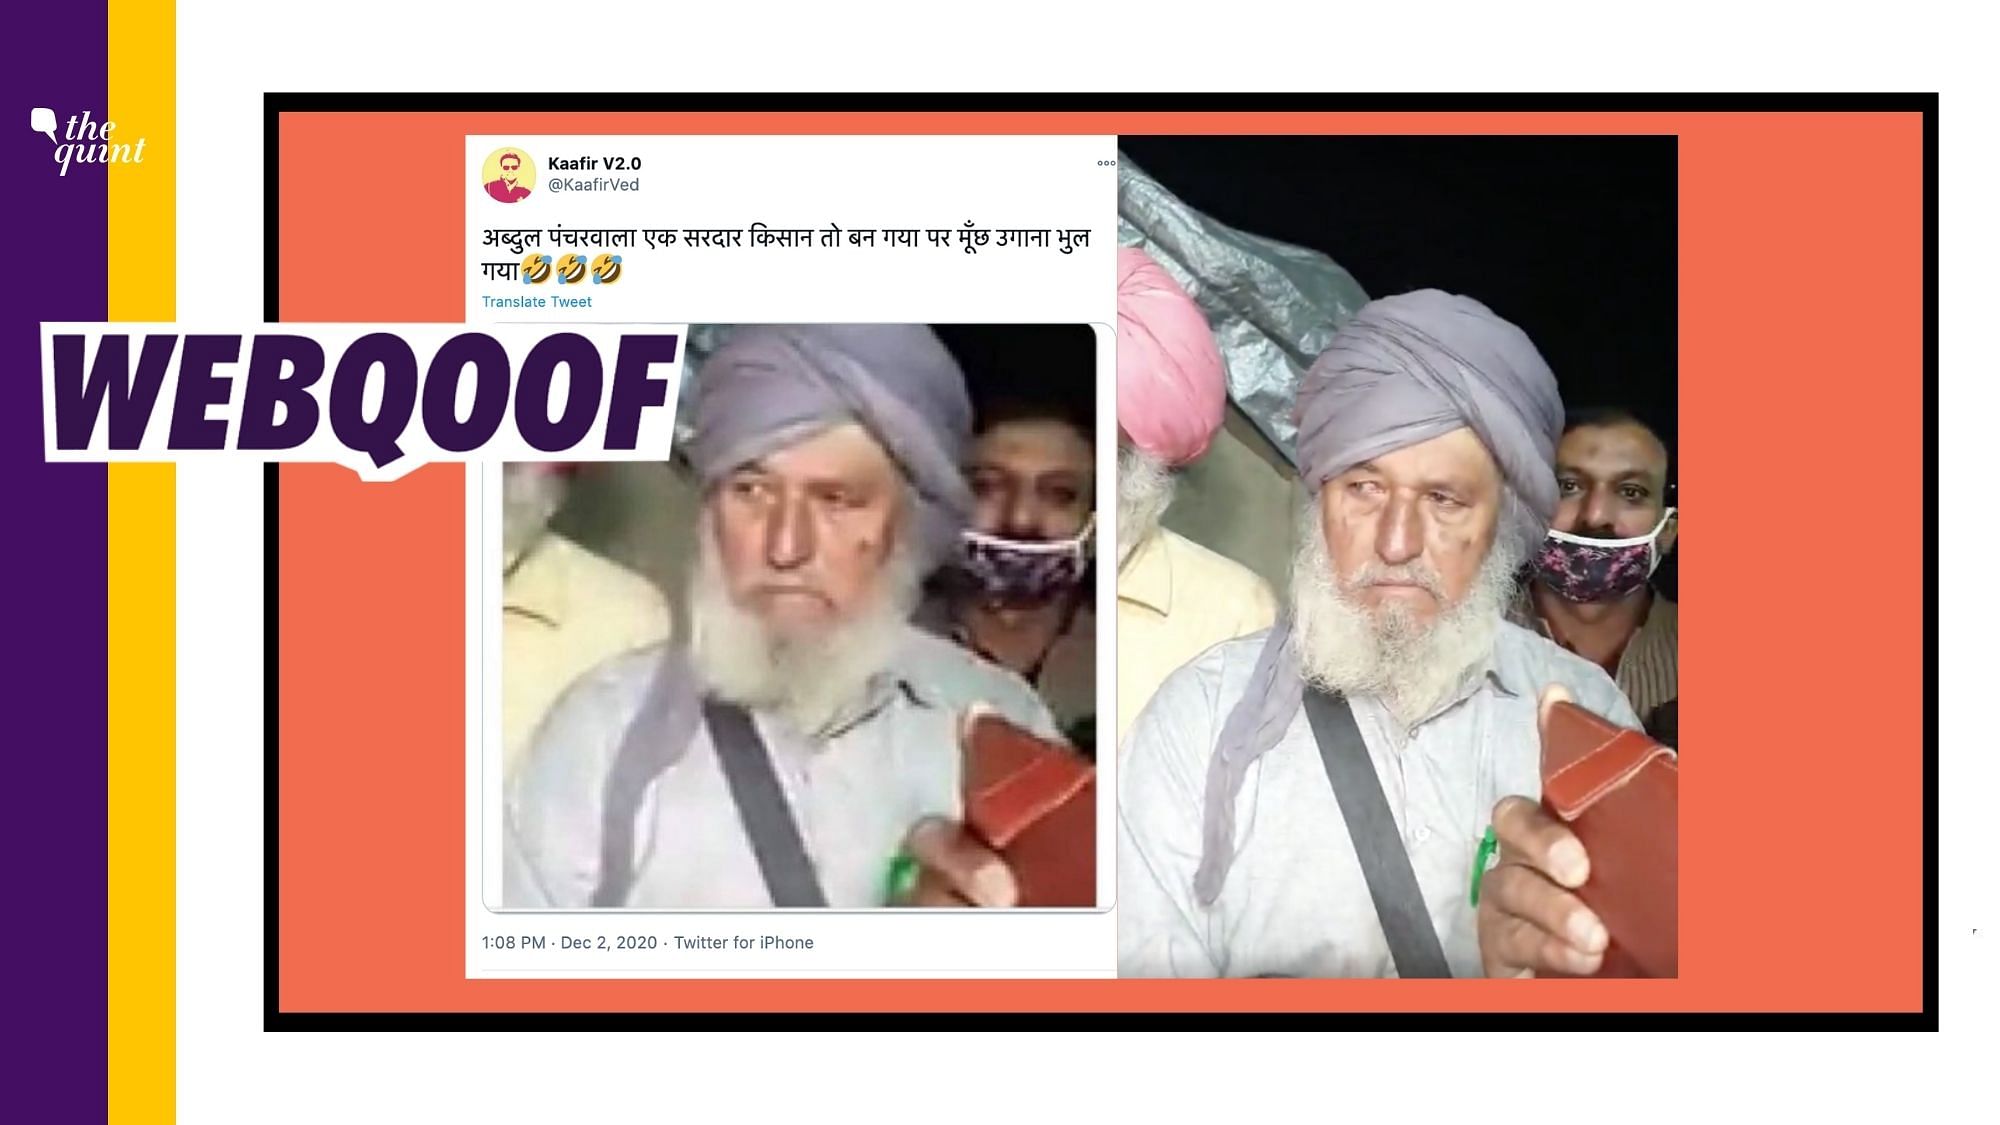 An image of a man wearing a turban was edited to falsely claim that he was disguised as a Muslim in the ongoing farmers’ protest.